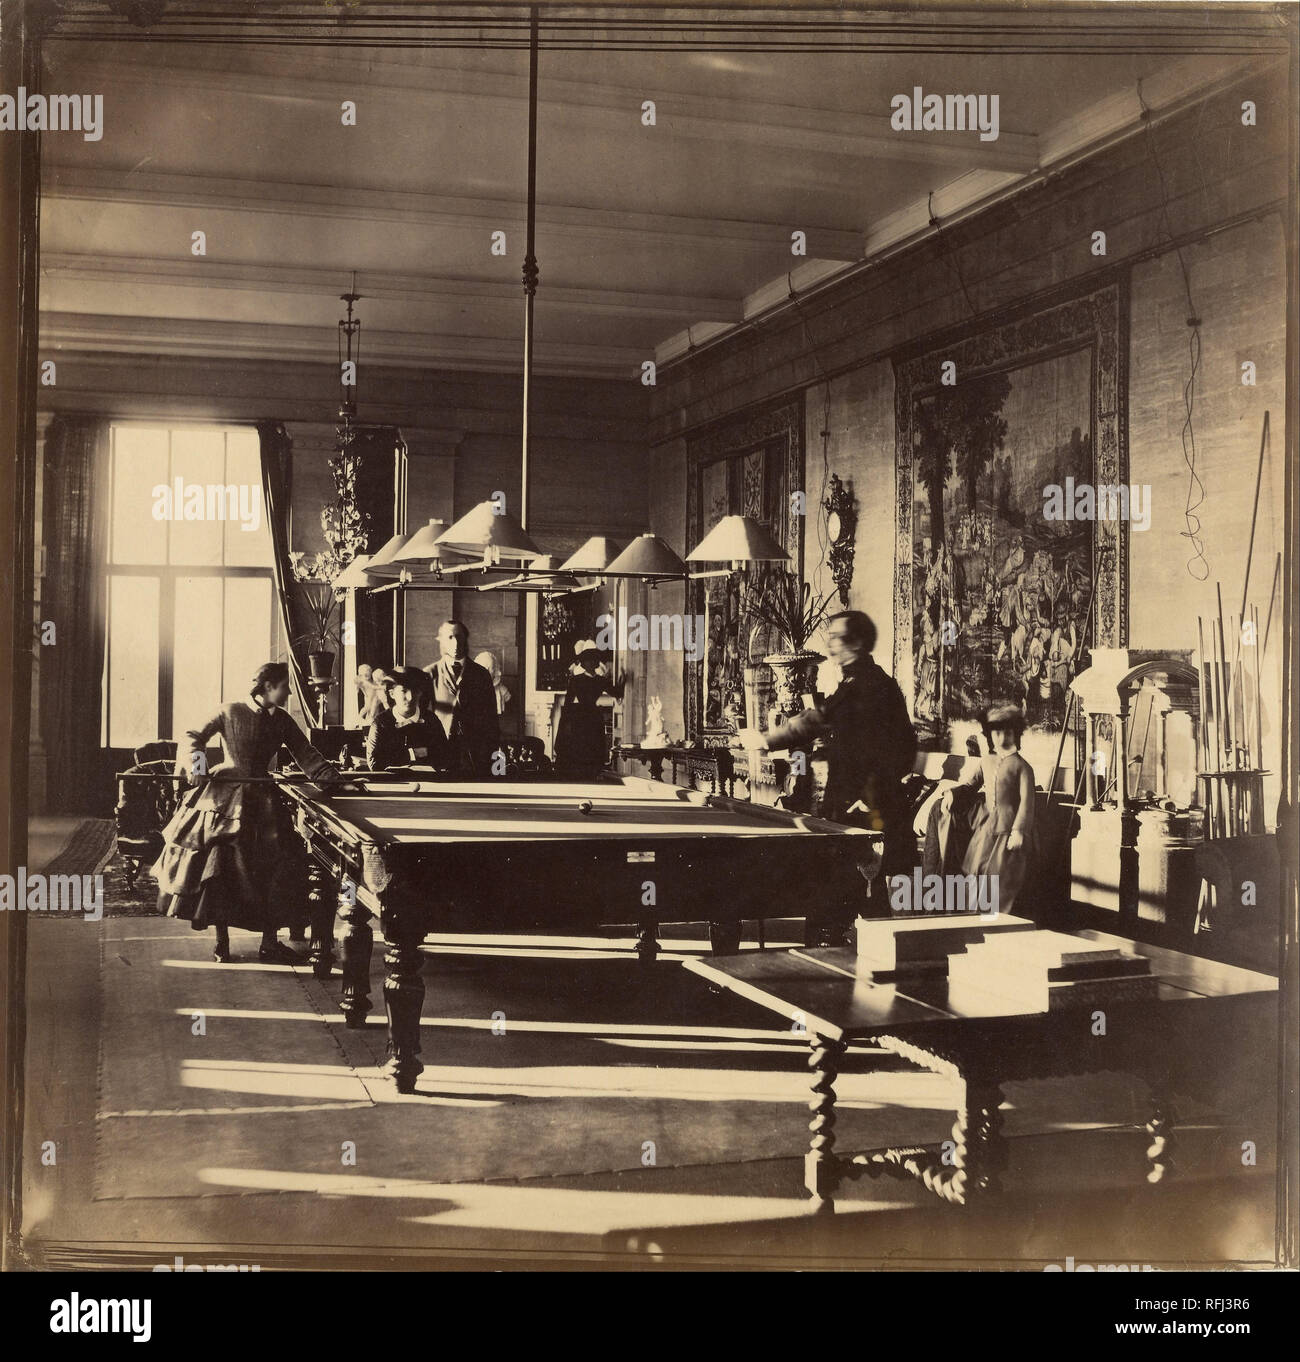 The Billiard Room, Mentmore. Date/Period: Ca. 1858. Print. Albumen silver. Height: 303 mm (11.92 in); Width: 306 mm (12.04 in). Author: Roger Fenton. Stock Photo